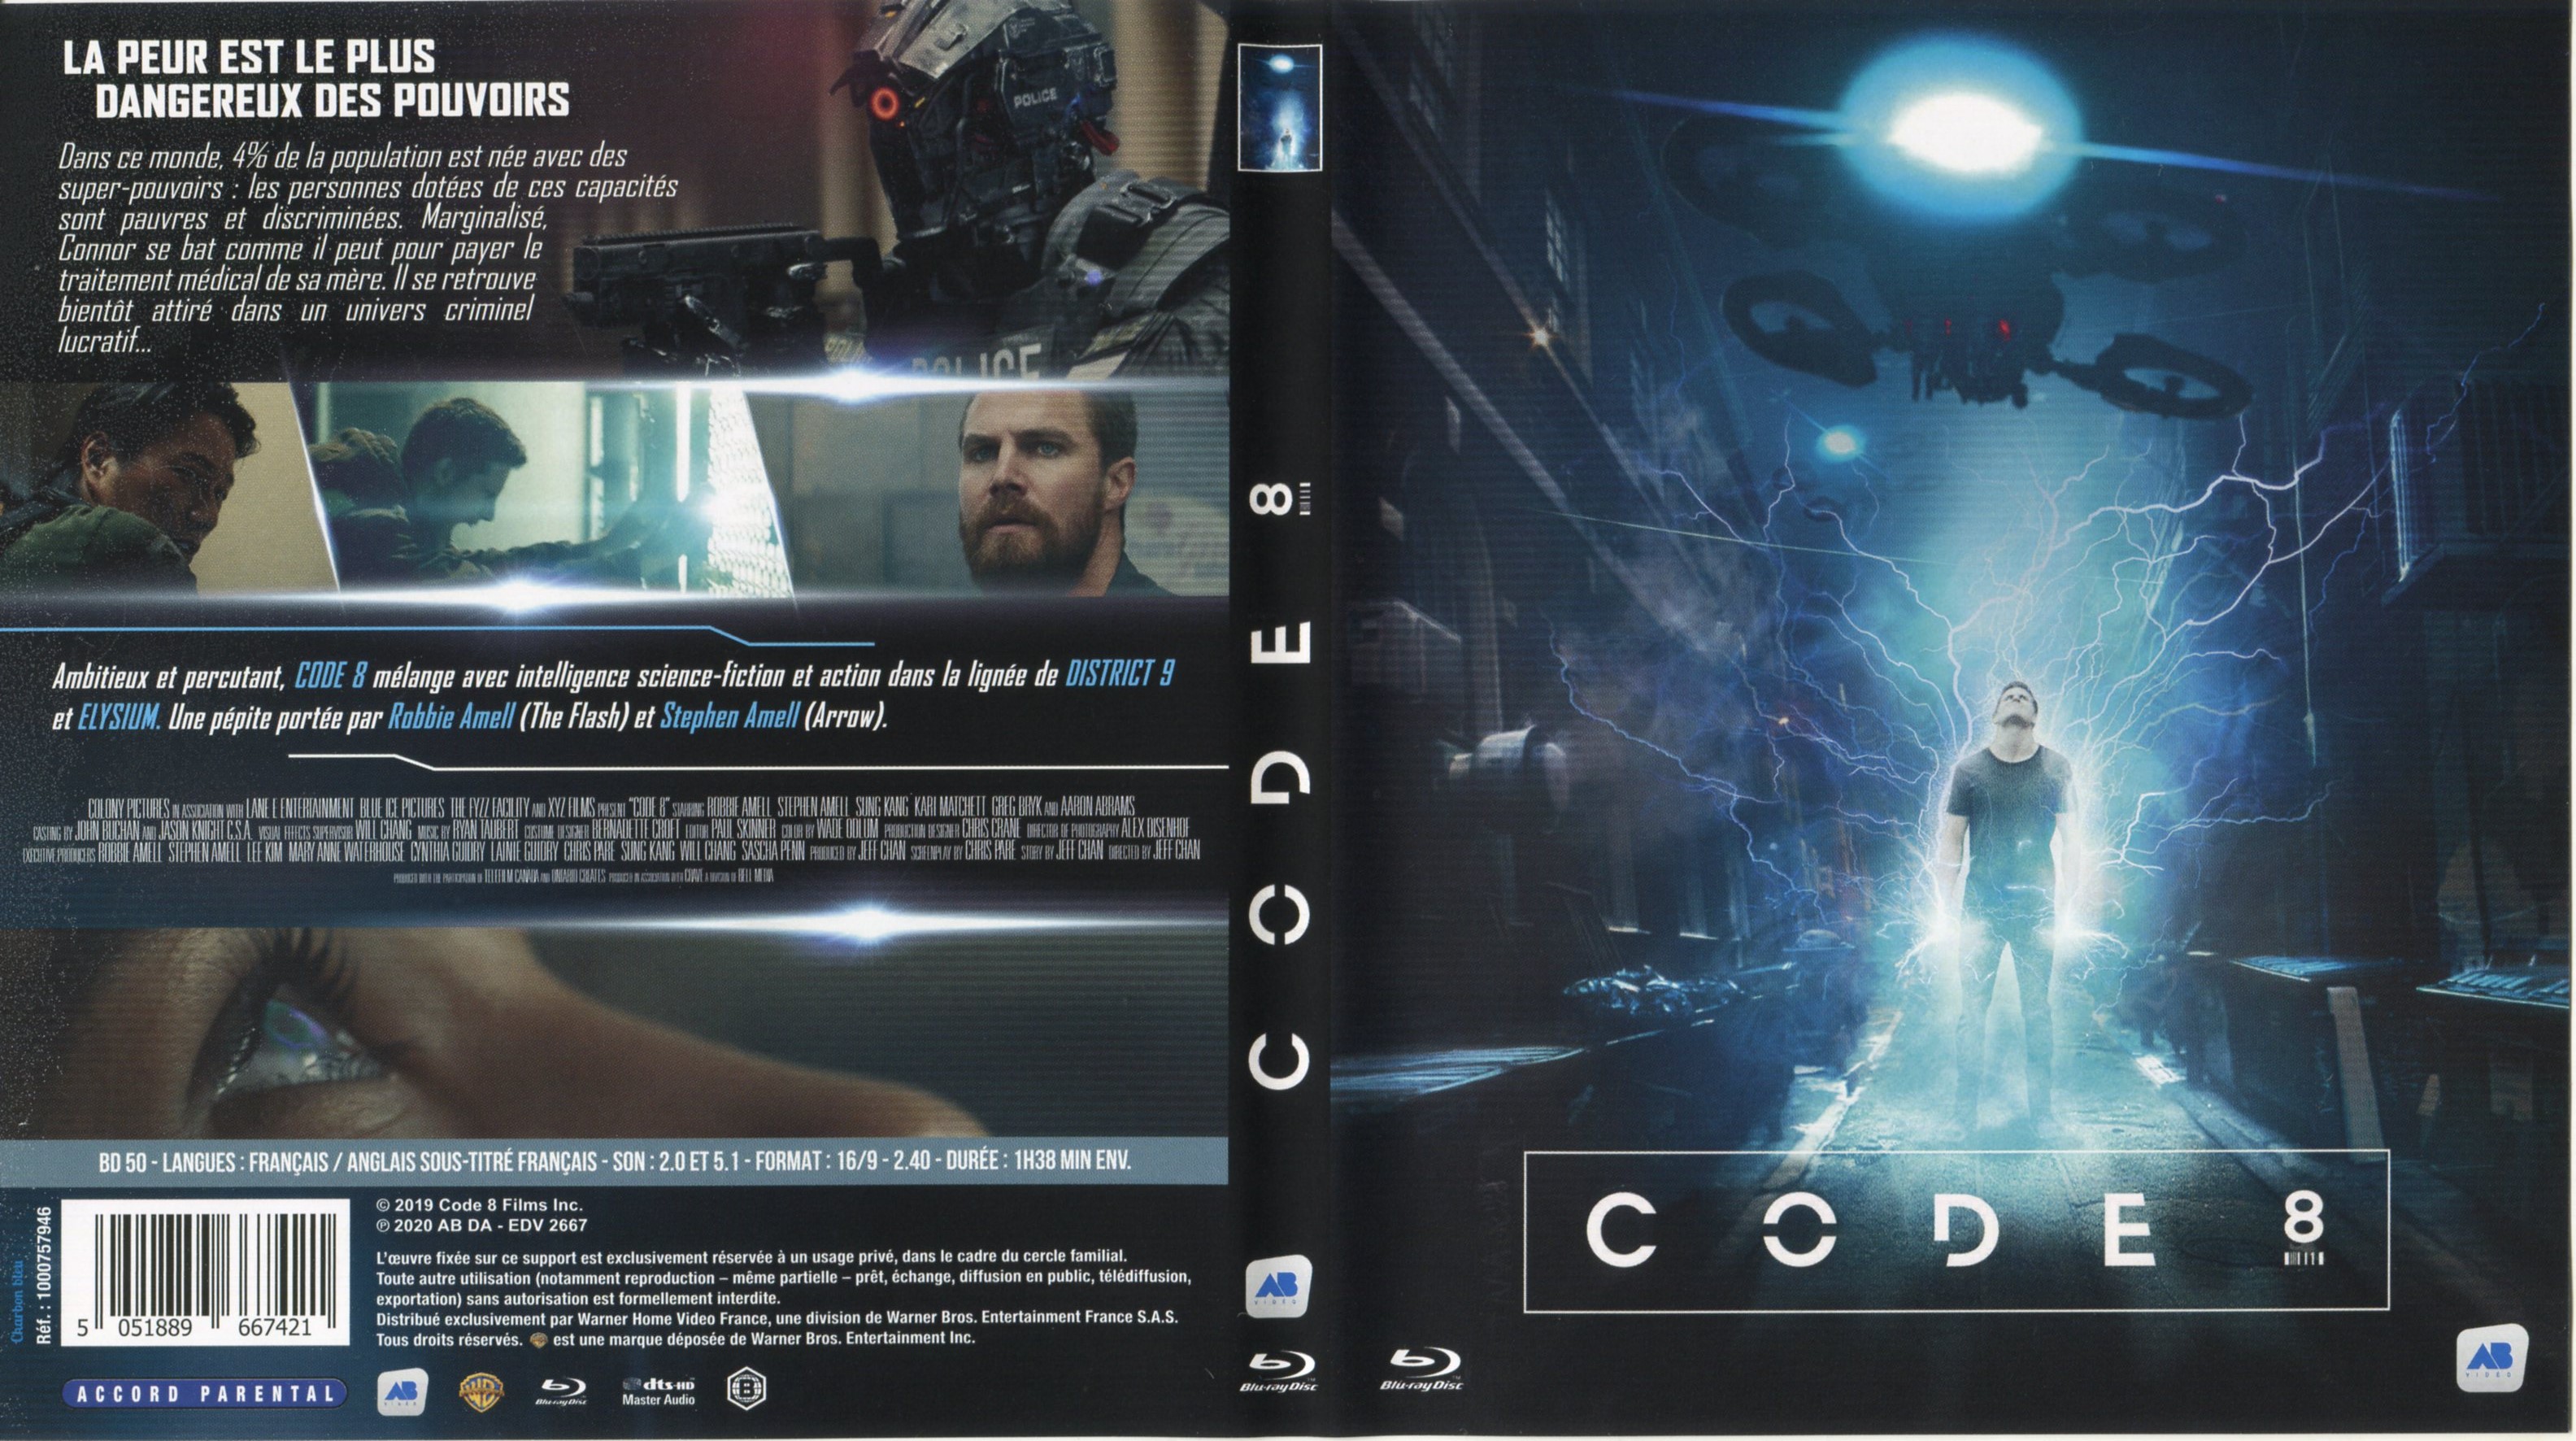 Jaquette DVD Code 8 (BLU-RAY)